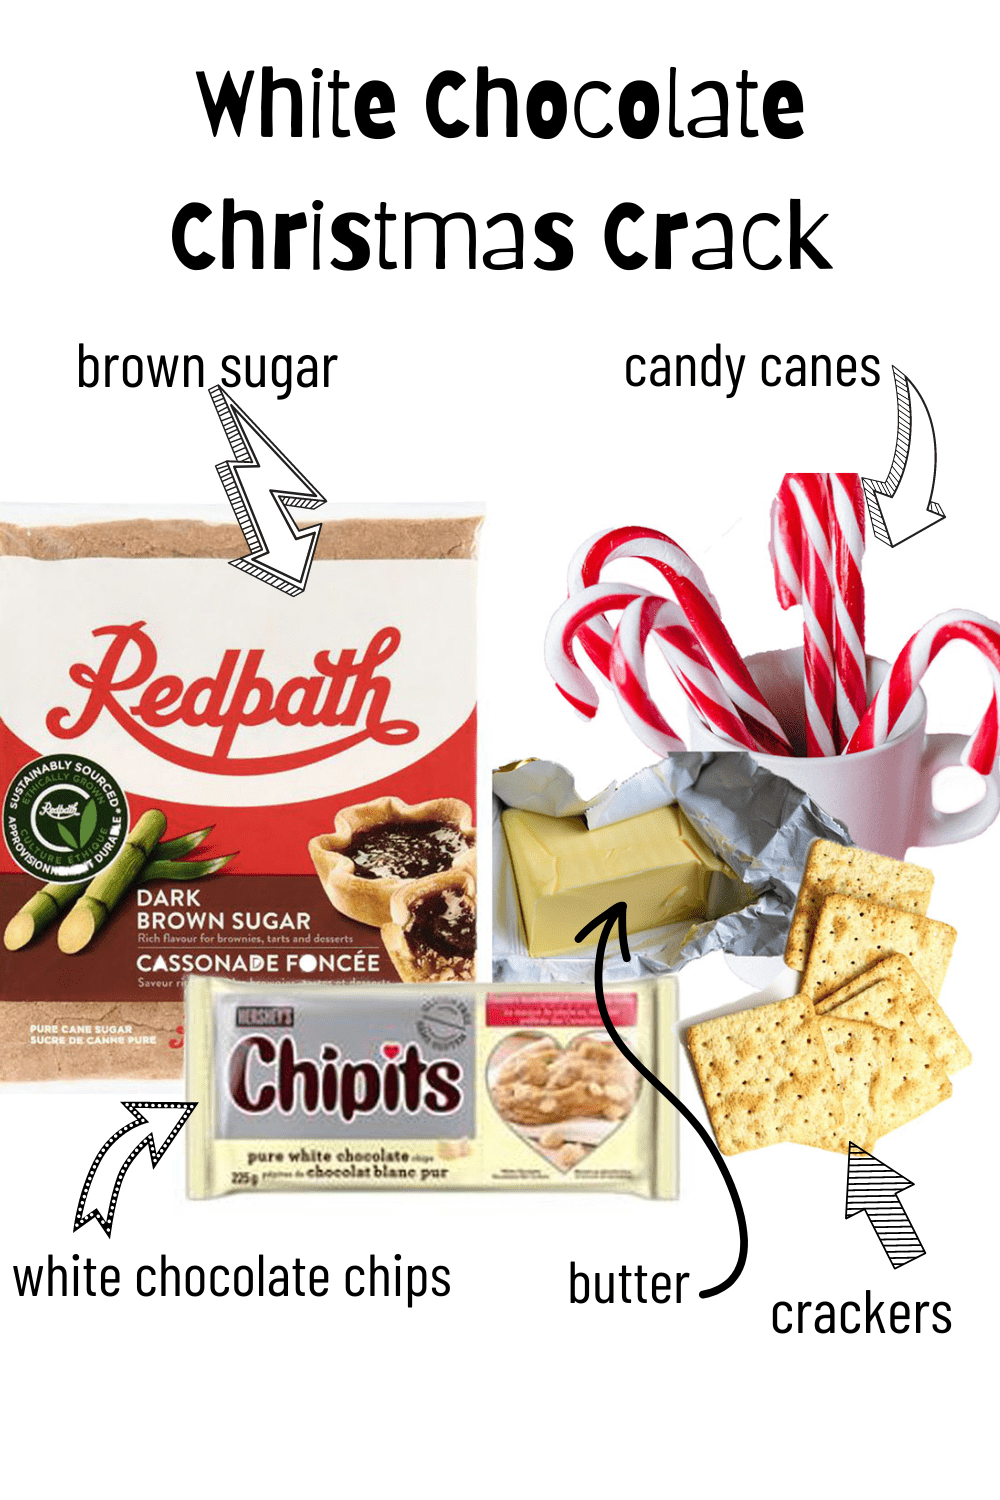 The ingredients needed to make the treat. Brown sugar, candy canes, butter, crackers, and white chocolate chips.